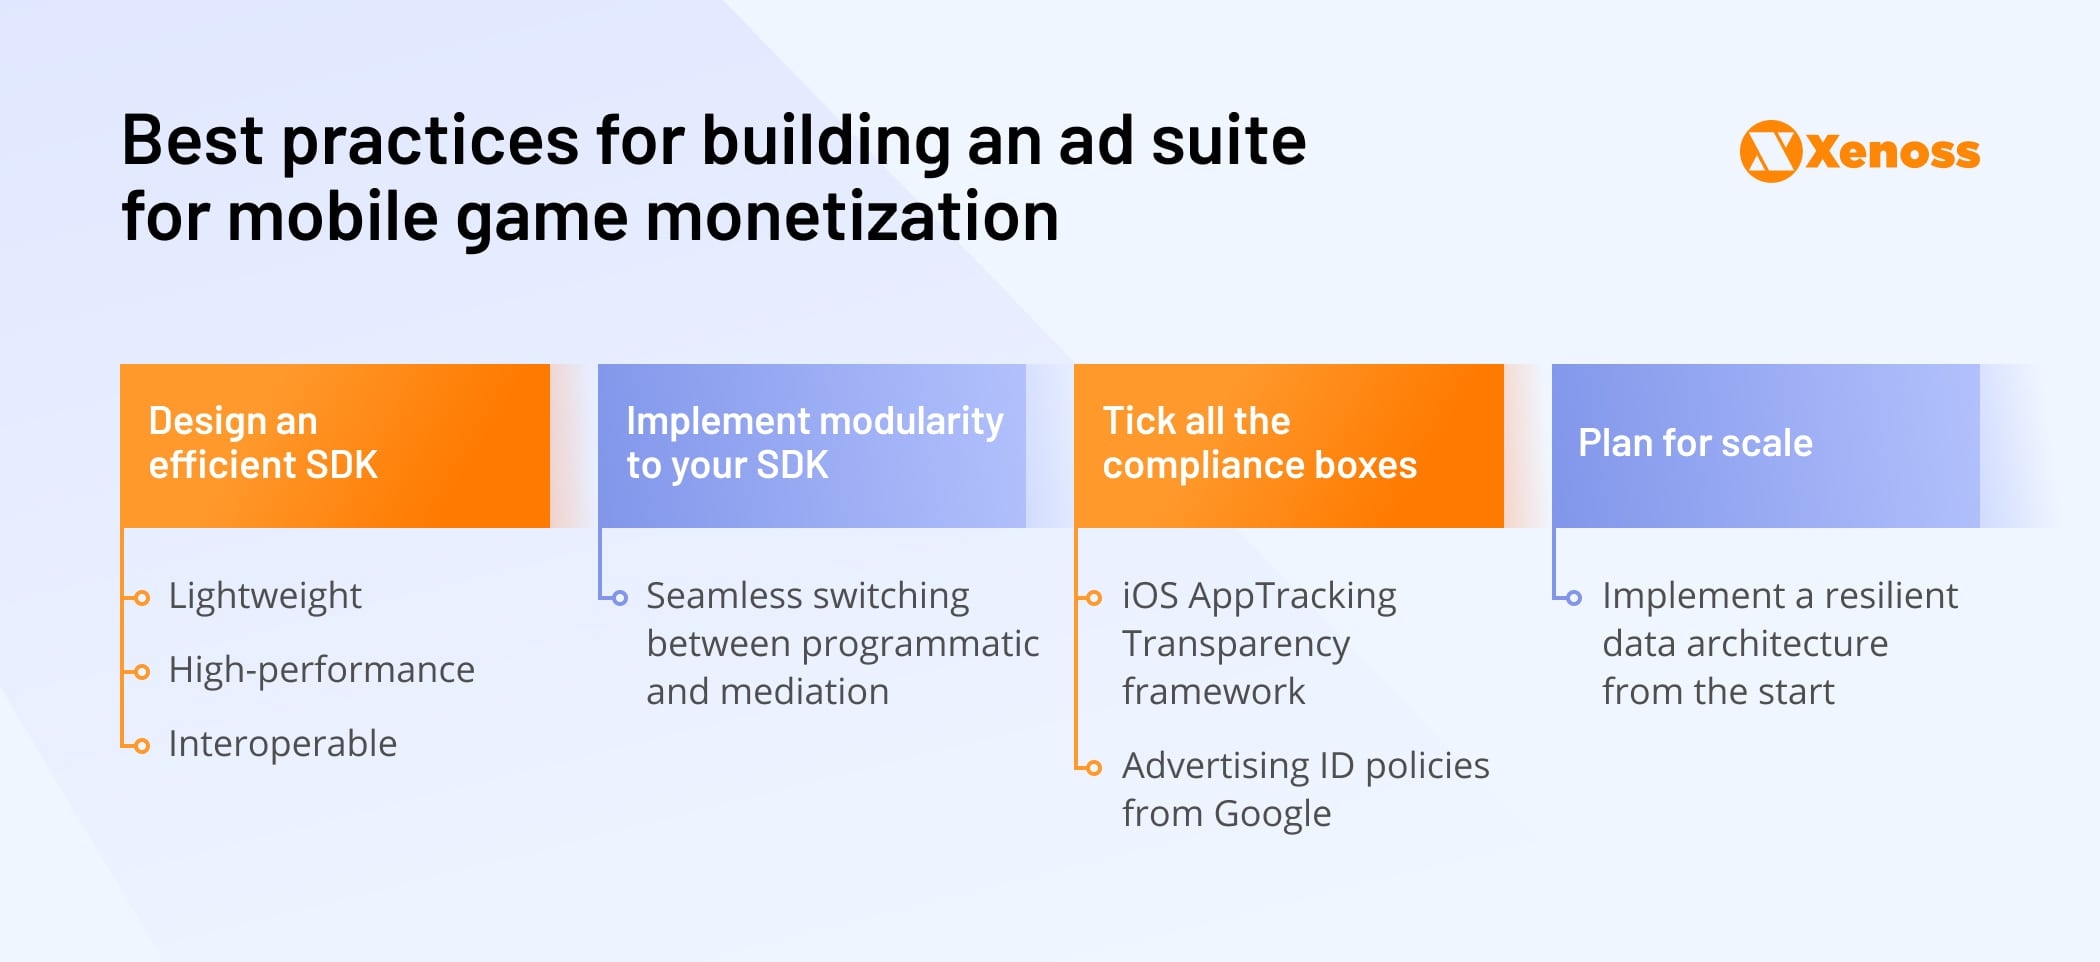 Best practices of game monetization - Xenoss blog - Mobile Game Monetization